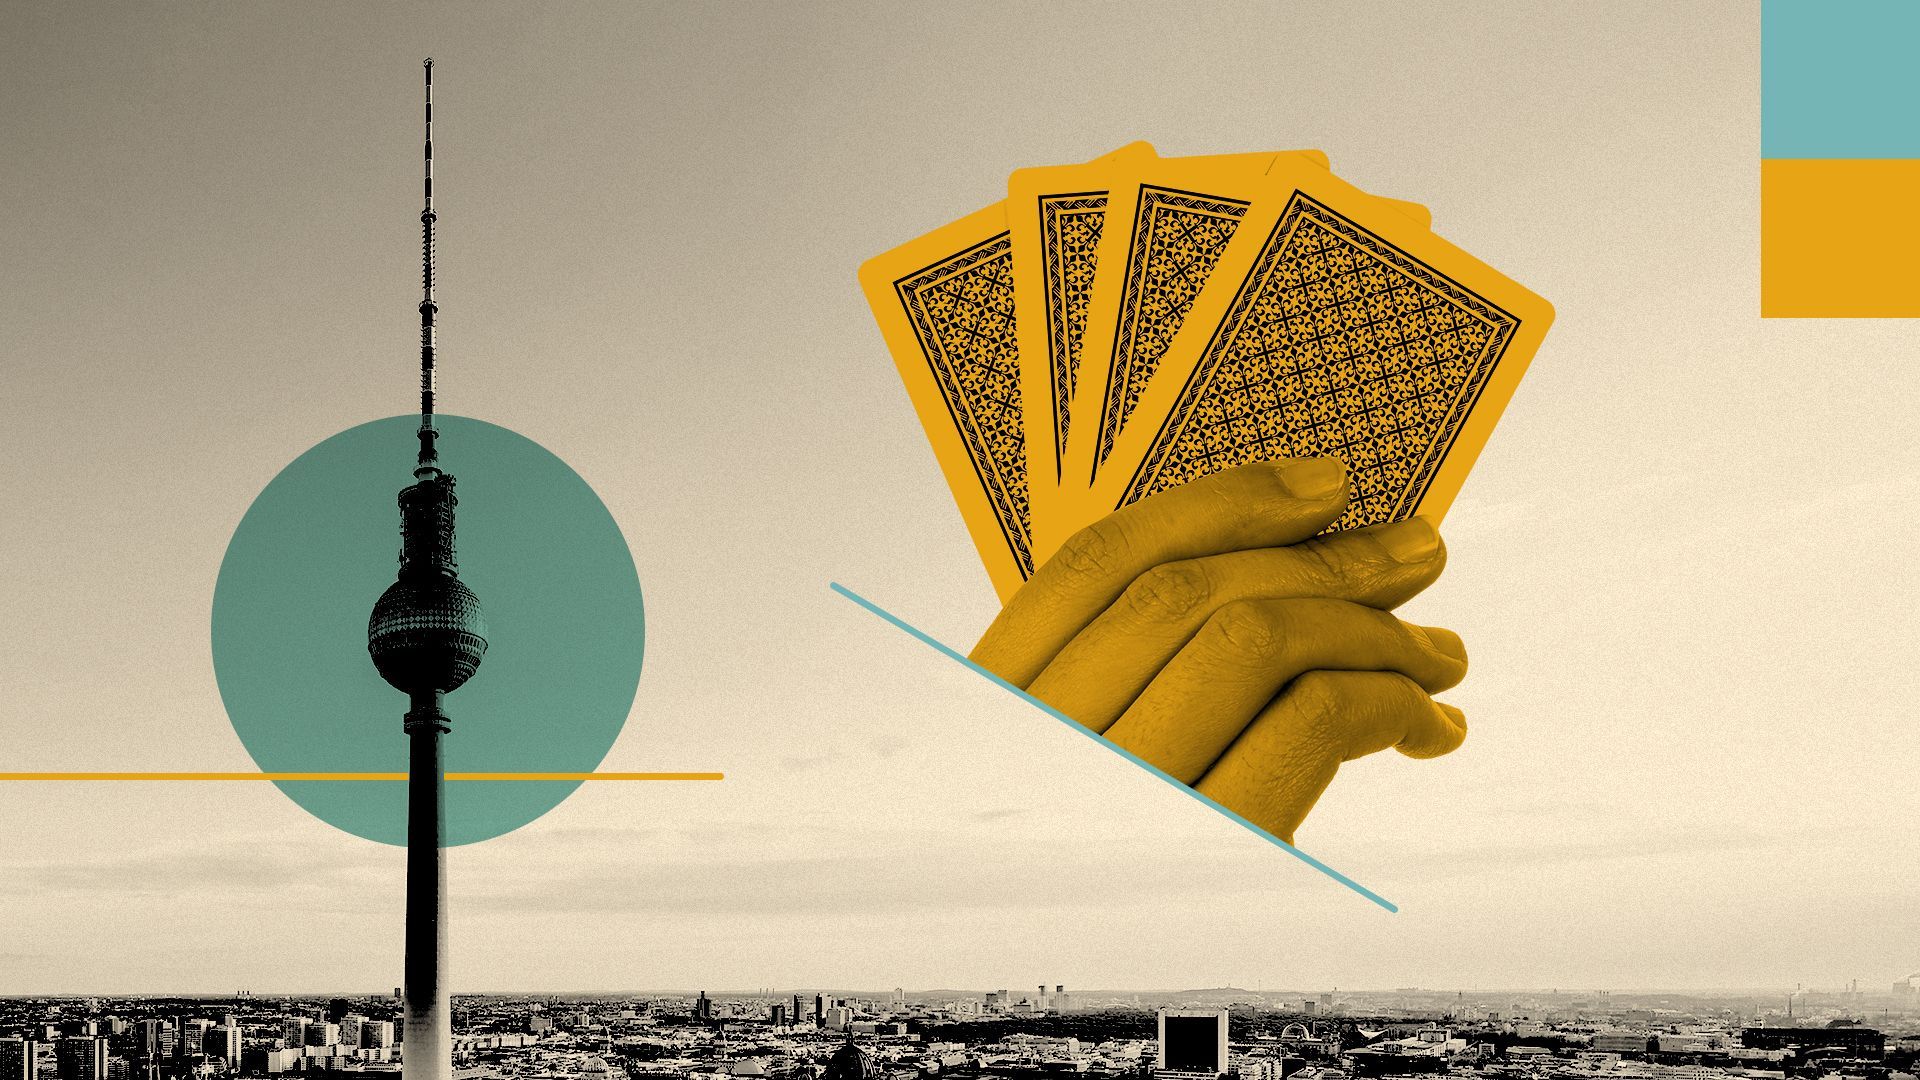 Illustration of a collage featuring a hand of playing cards, the Berlin TV Tower, and colorful shapes and lines. 